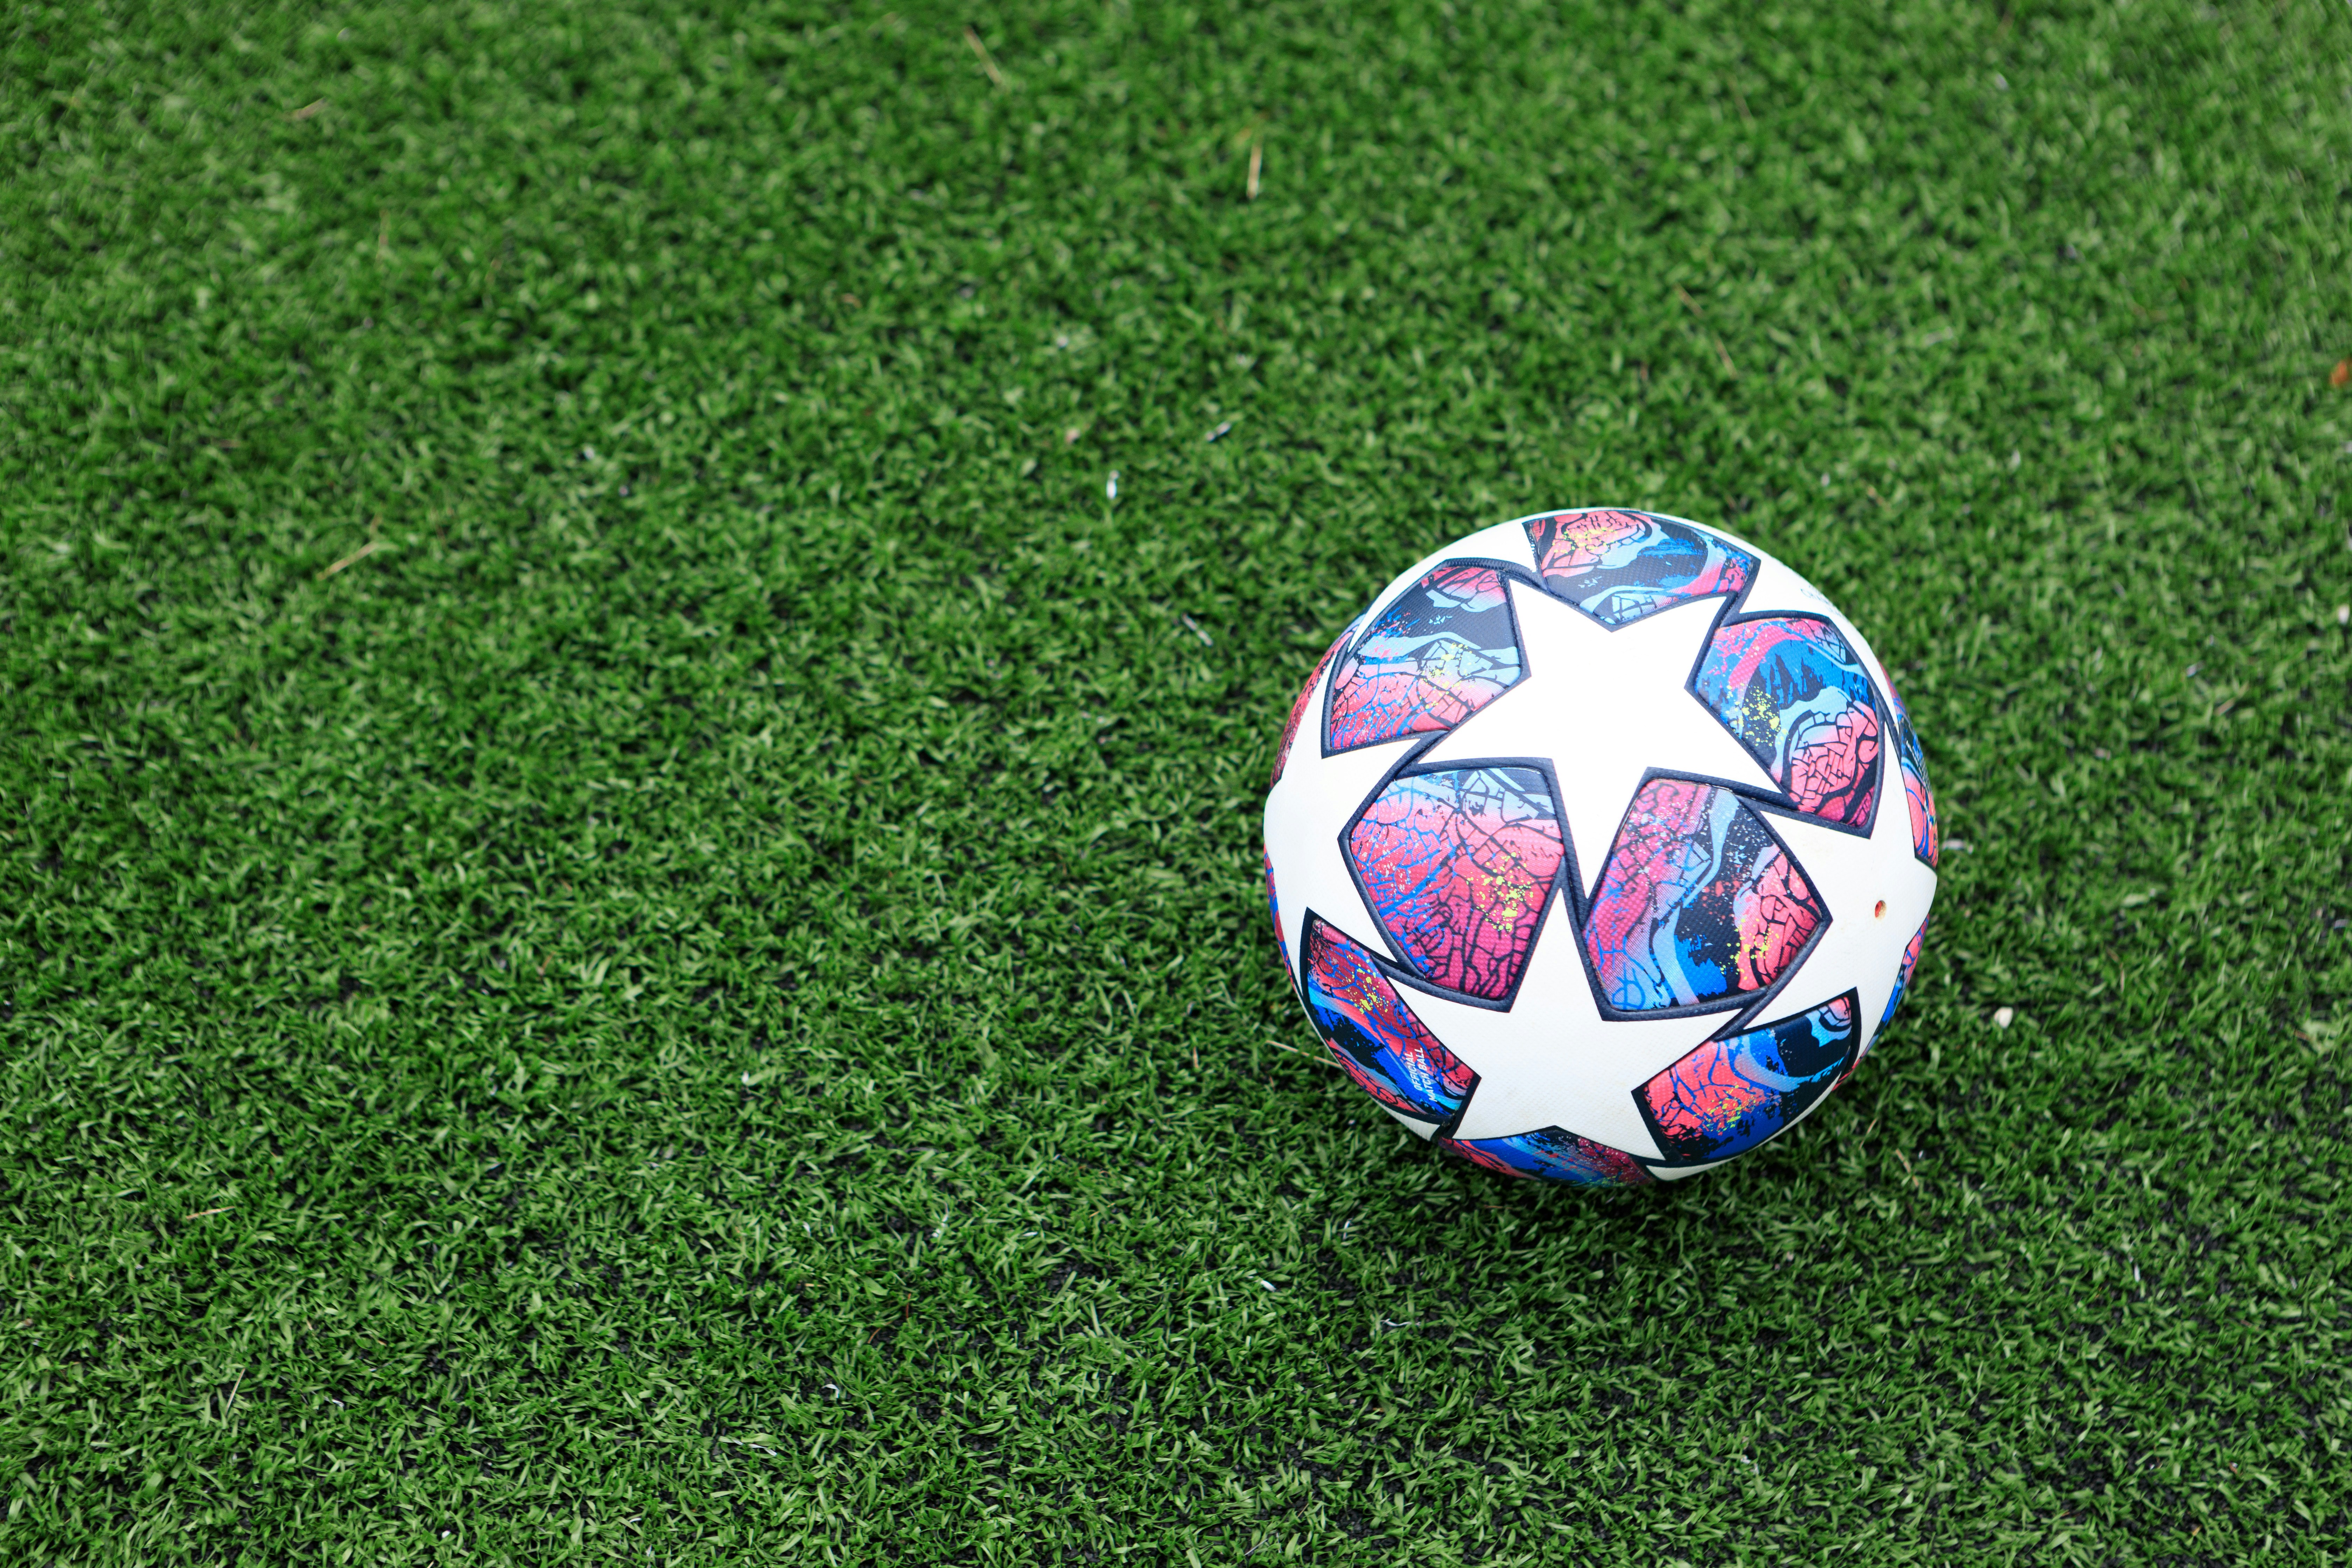 A star-decorated soccer ball sits on the pitch.